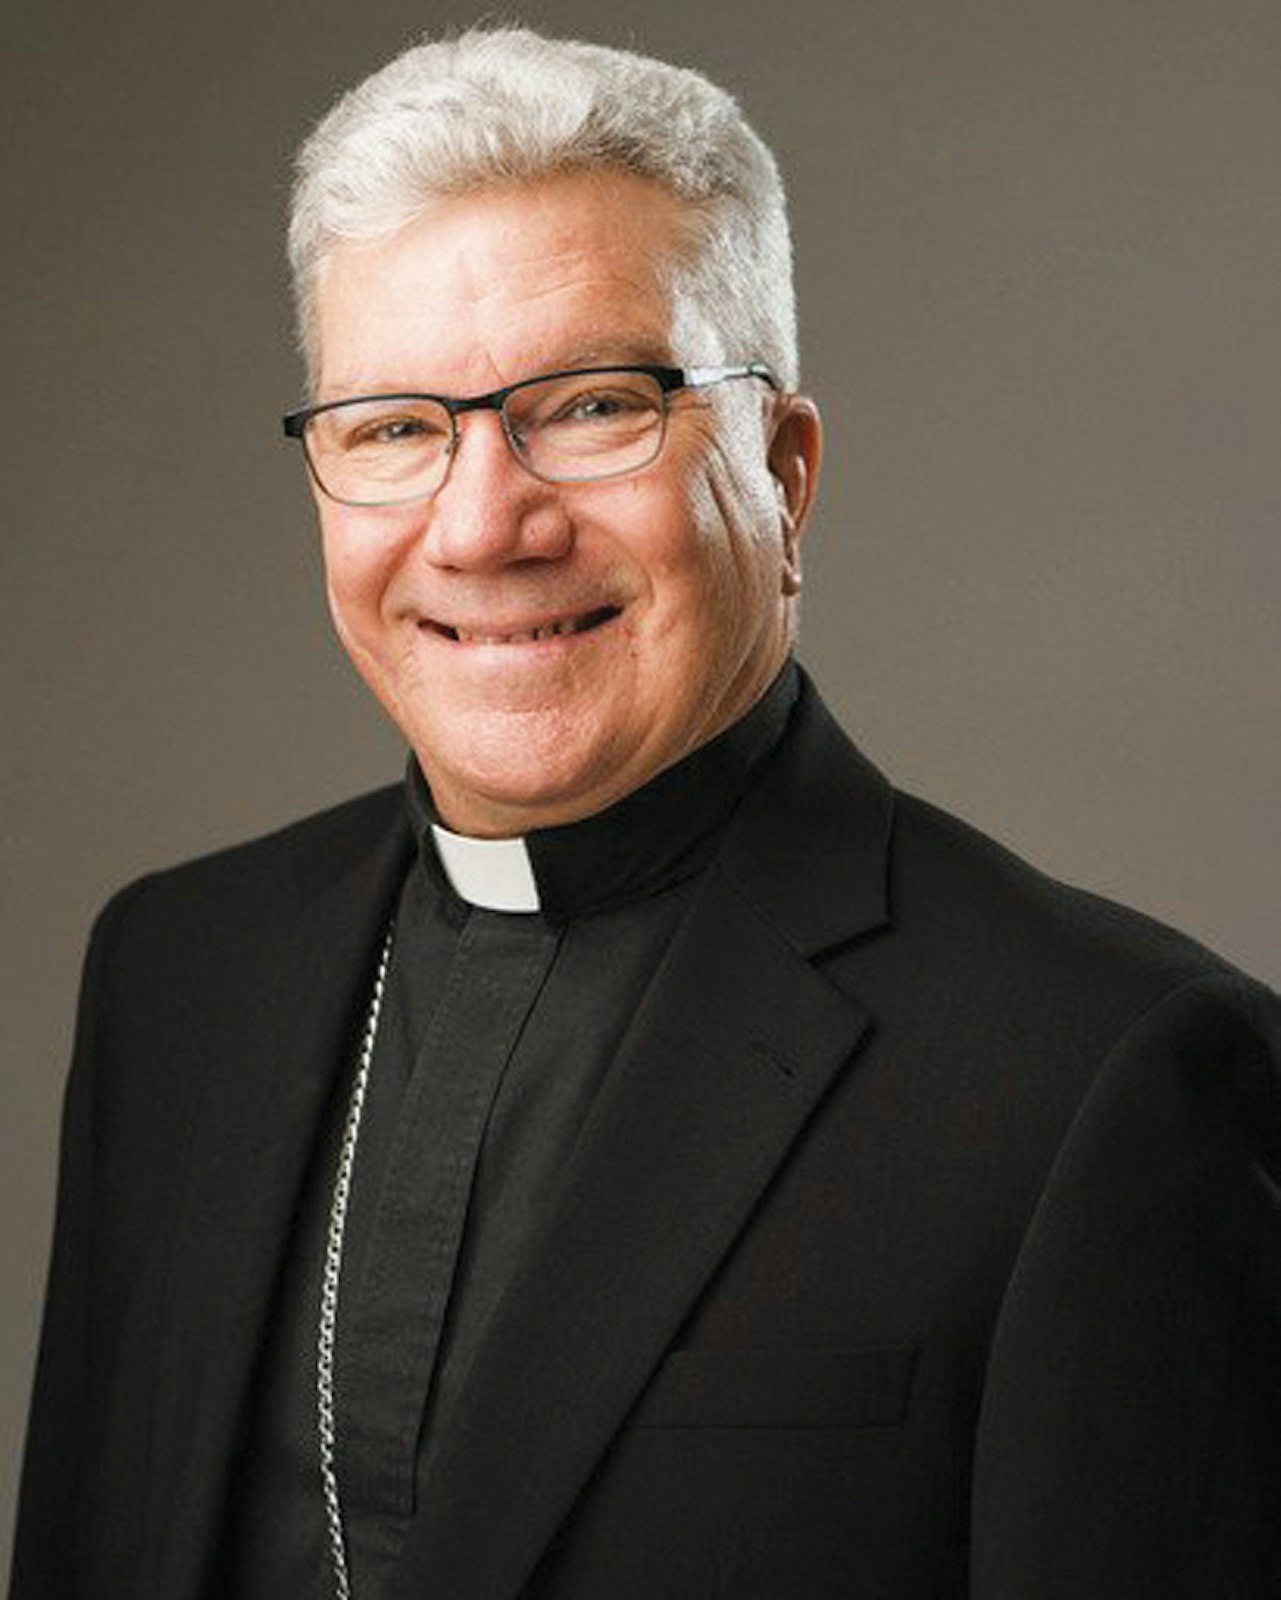 Bishop Jeffrey M. Monforton, a native of Detroit who has spent the past 11 years as bishop of the Diocese of Steubenville, Ohio, will return to the Archdiocese of Detroit during a Liturgy of Welcome and Inauguration of Ministry on Nov. 7.